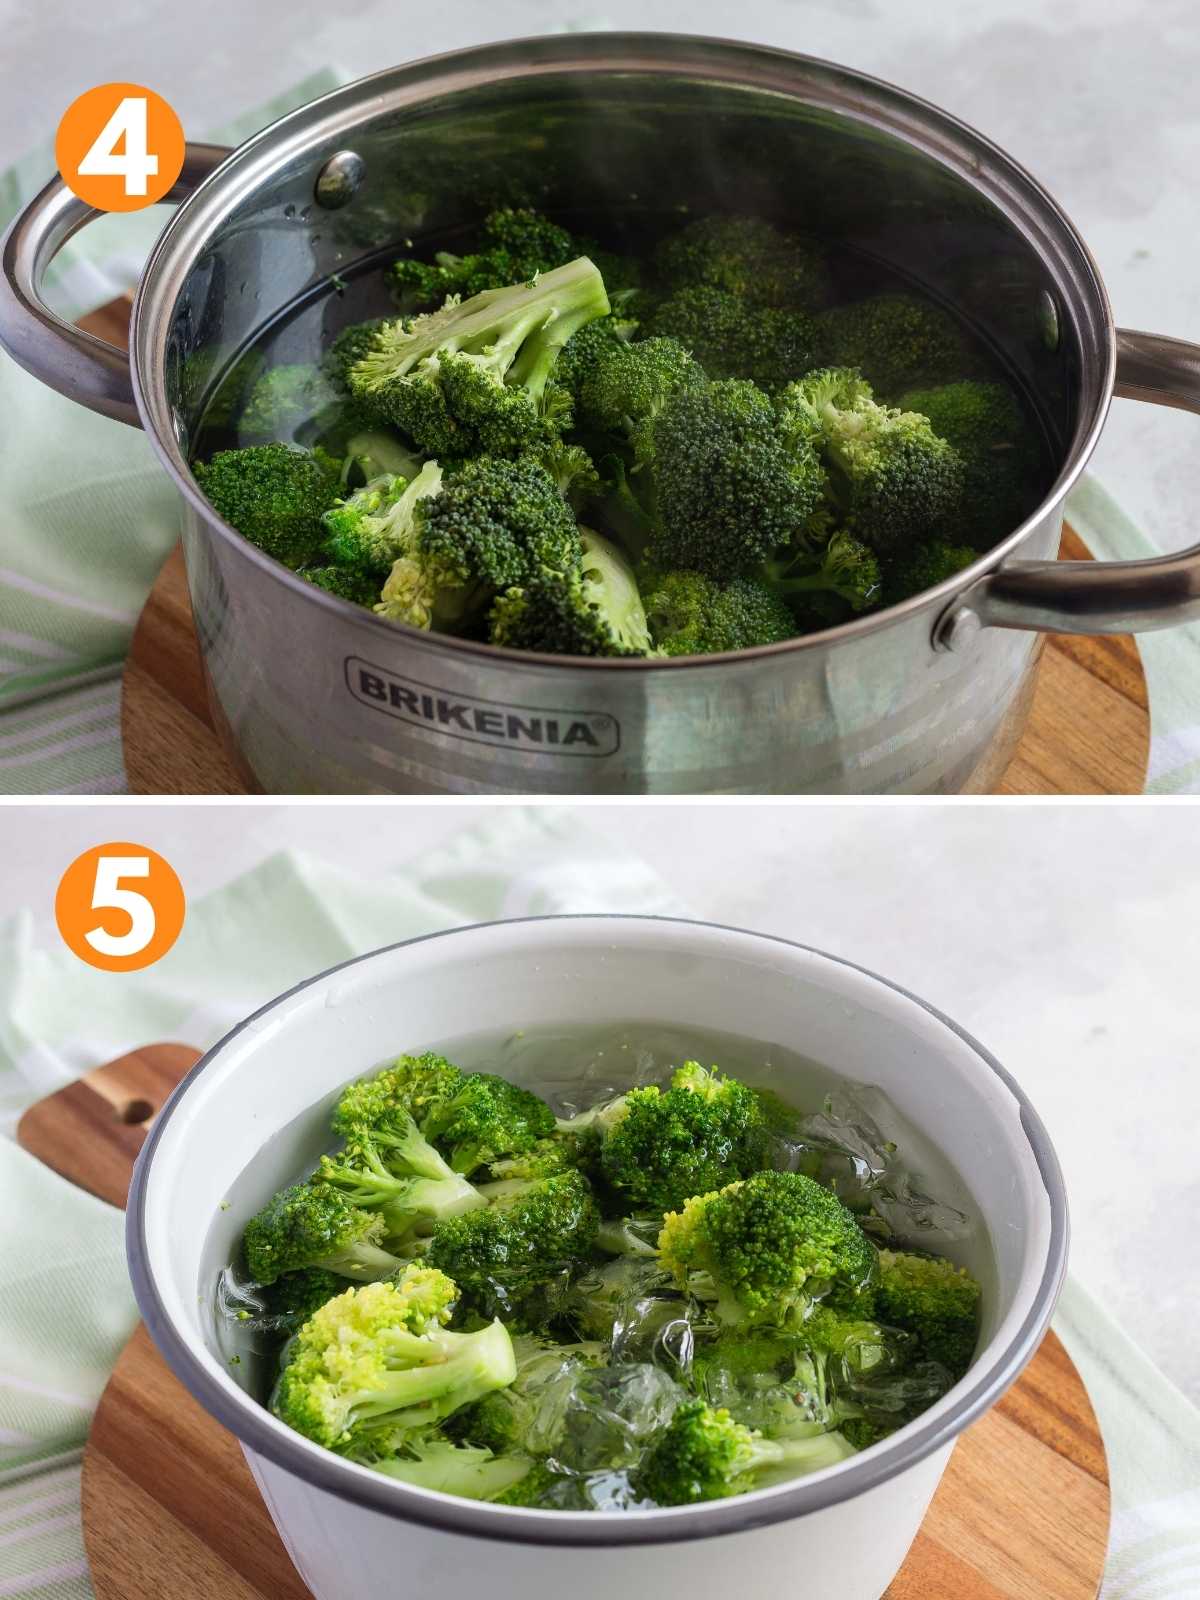 Broccoli in a pot of water to blanch and submerged in ice water bath.